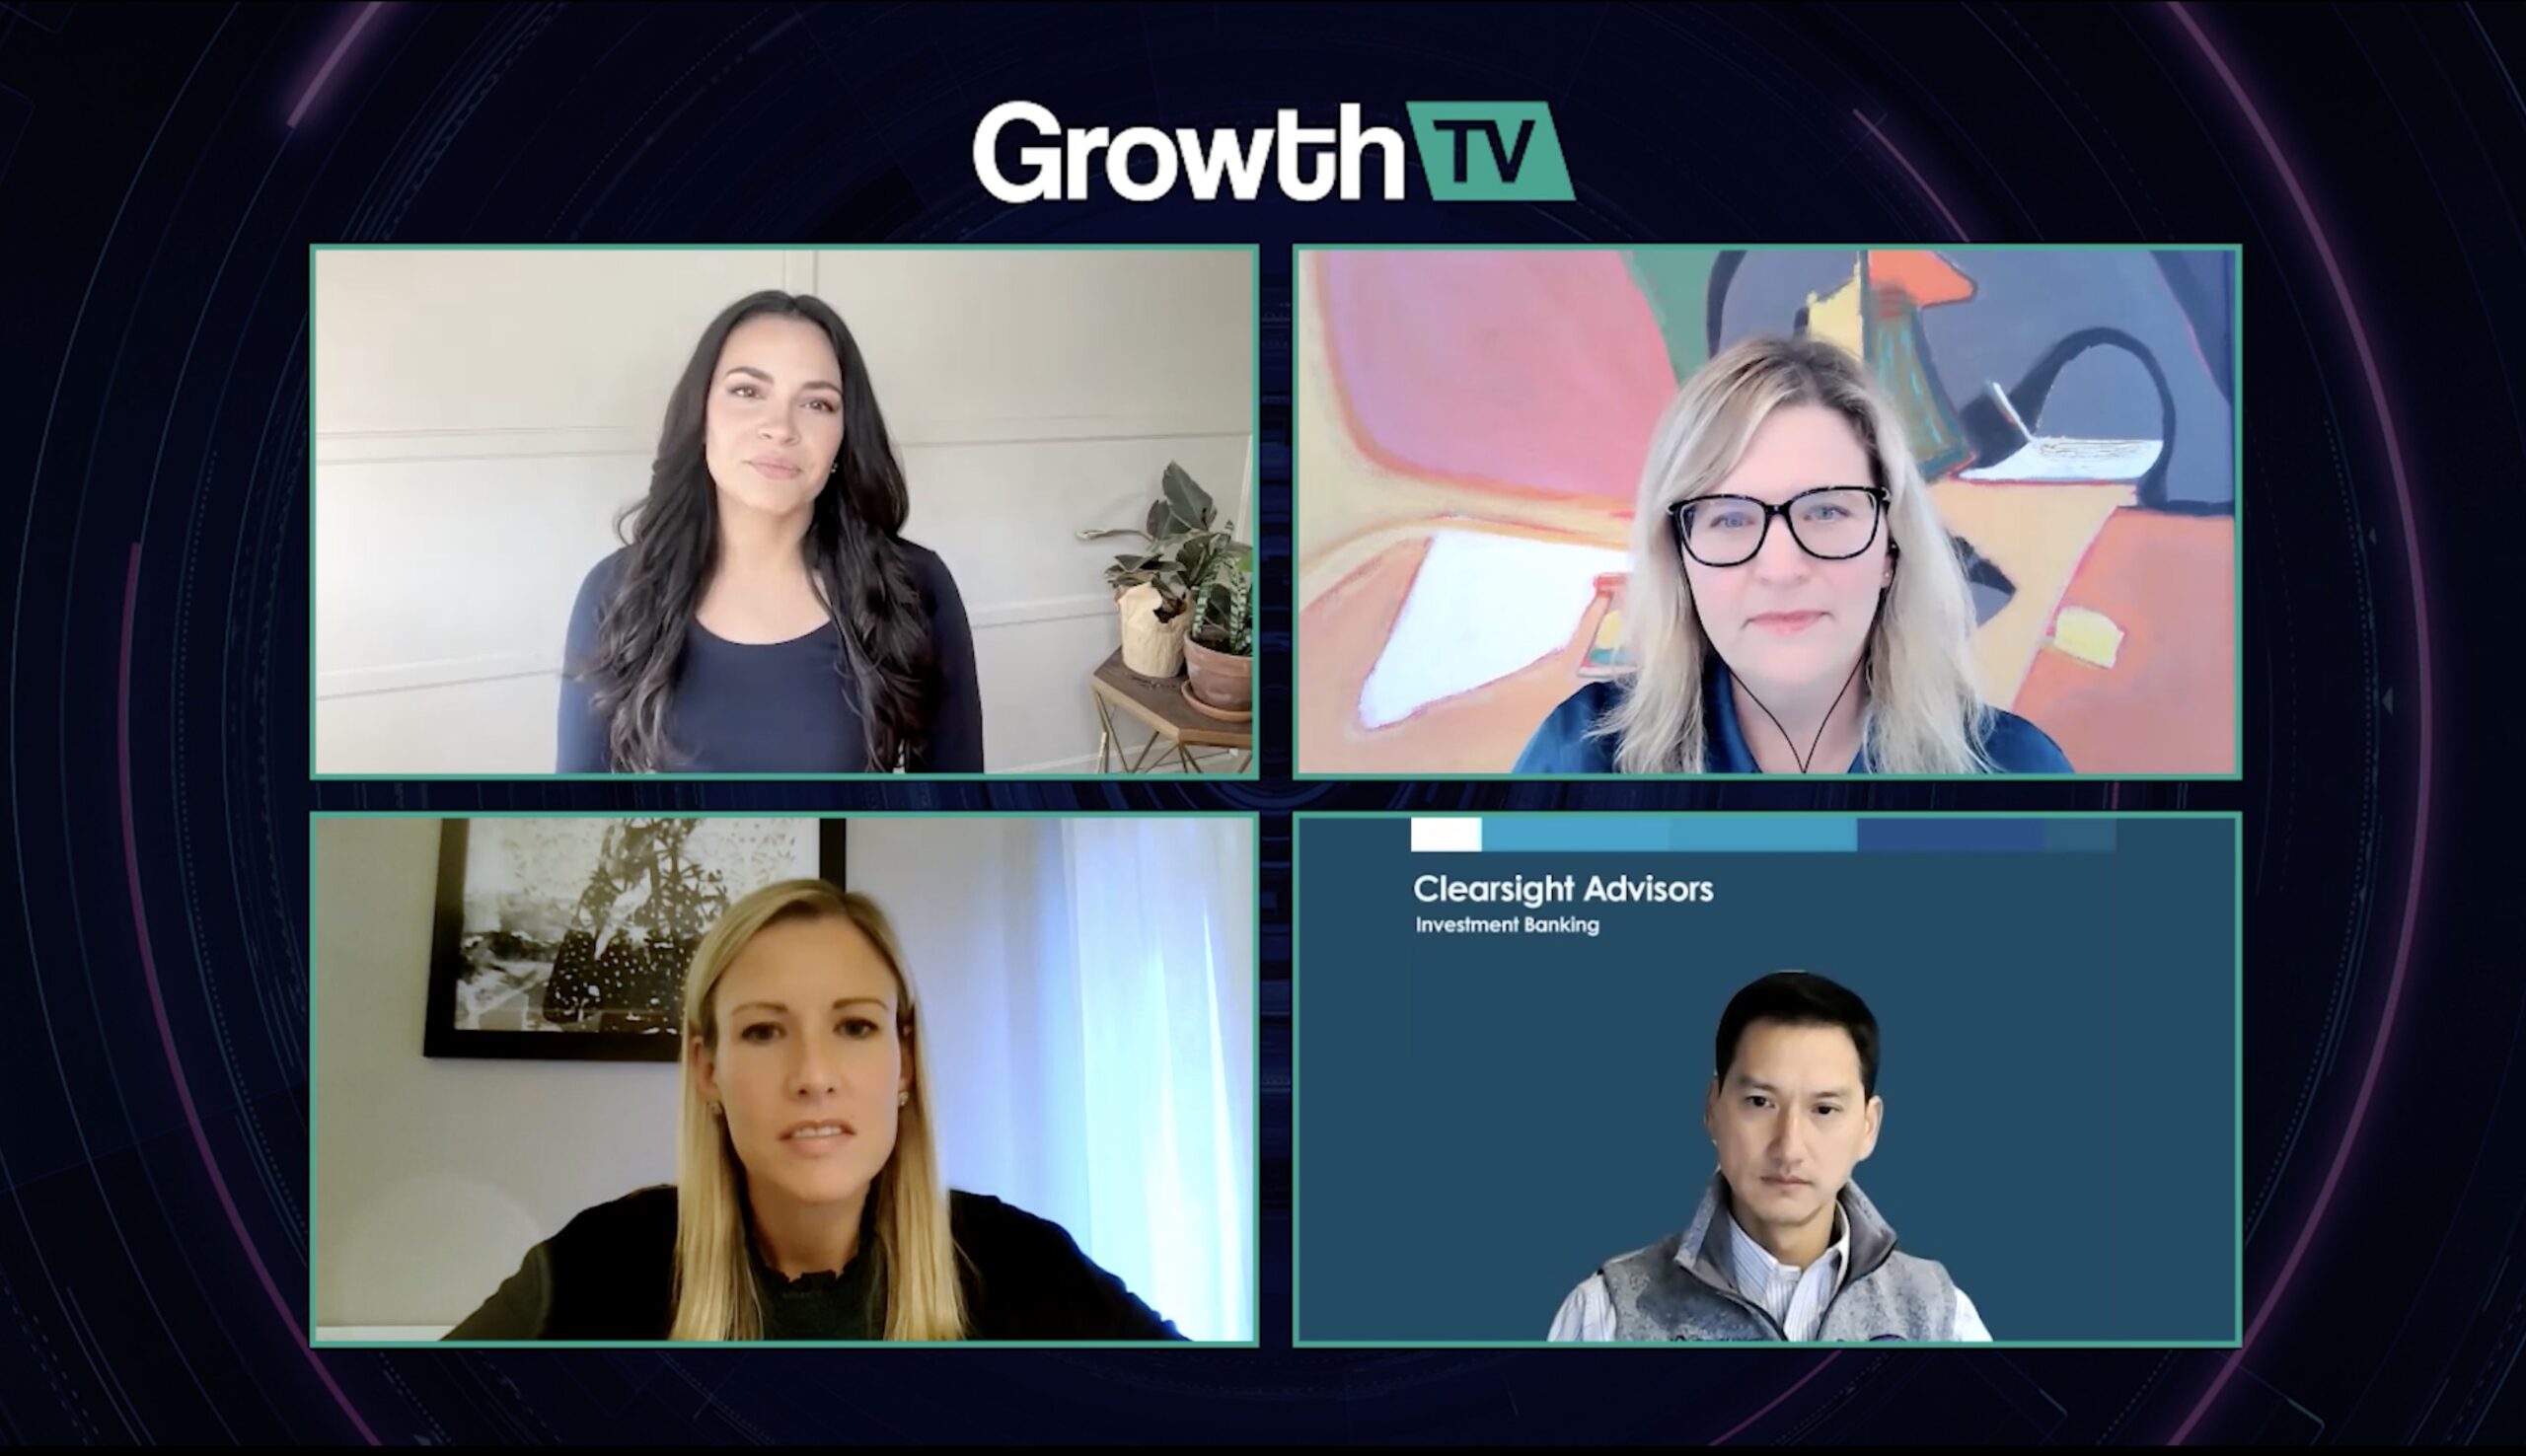 growthtv-dei-private-equity-answerlab-shamrock